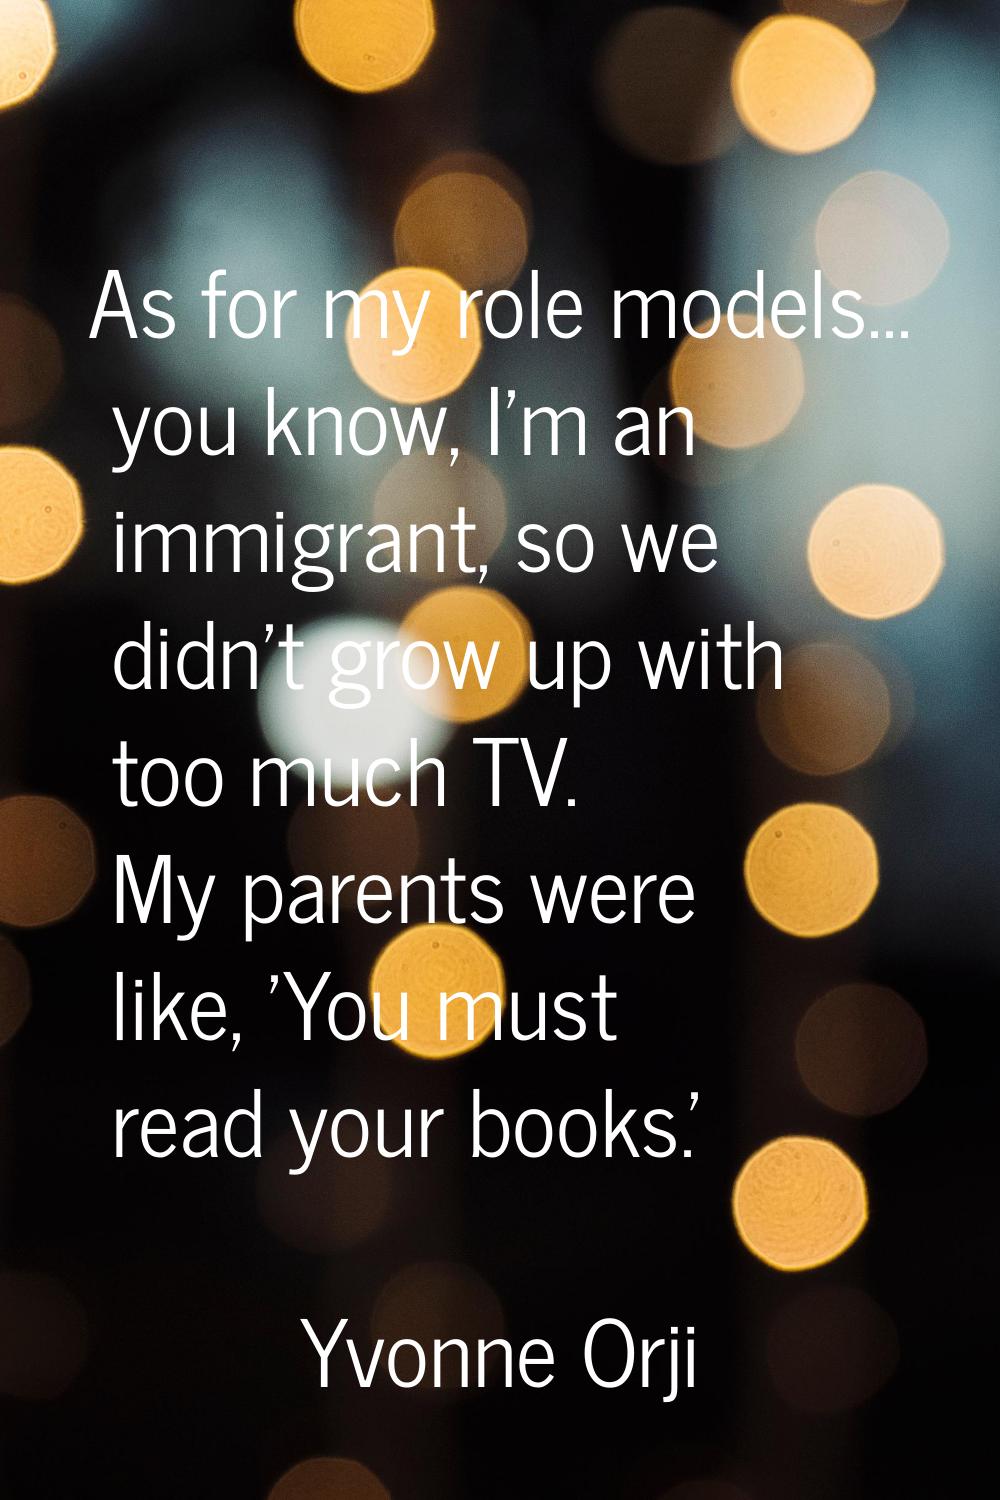 As for my role models... you know, I'm an immigrant, so we didn't grow up with too much TV. My pare